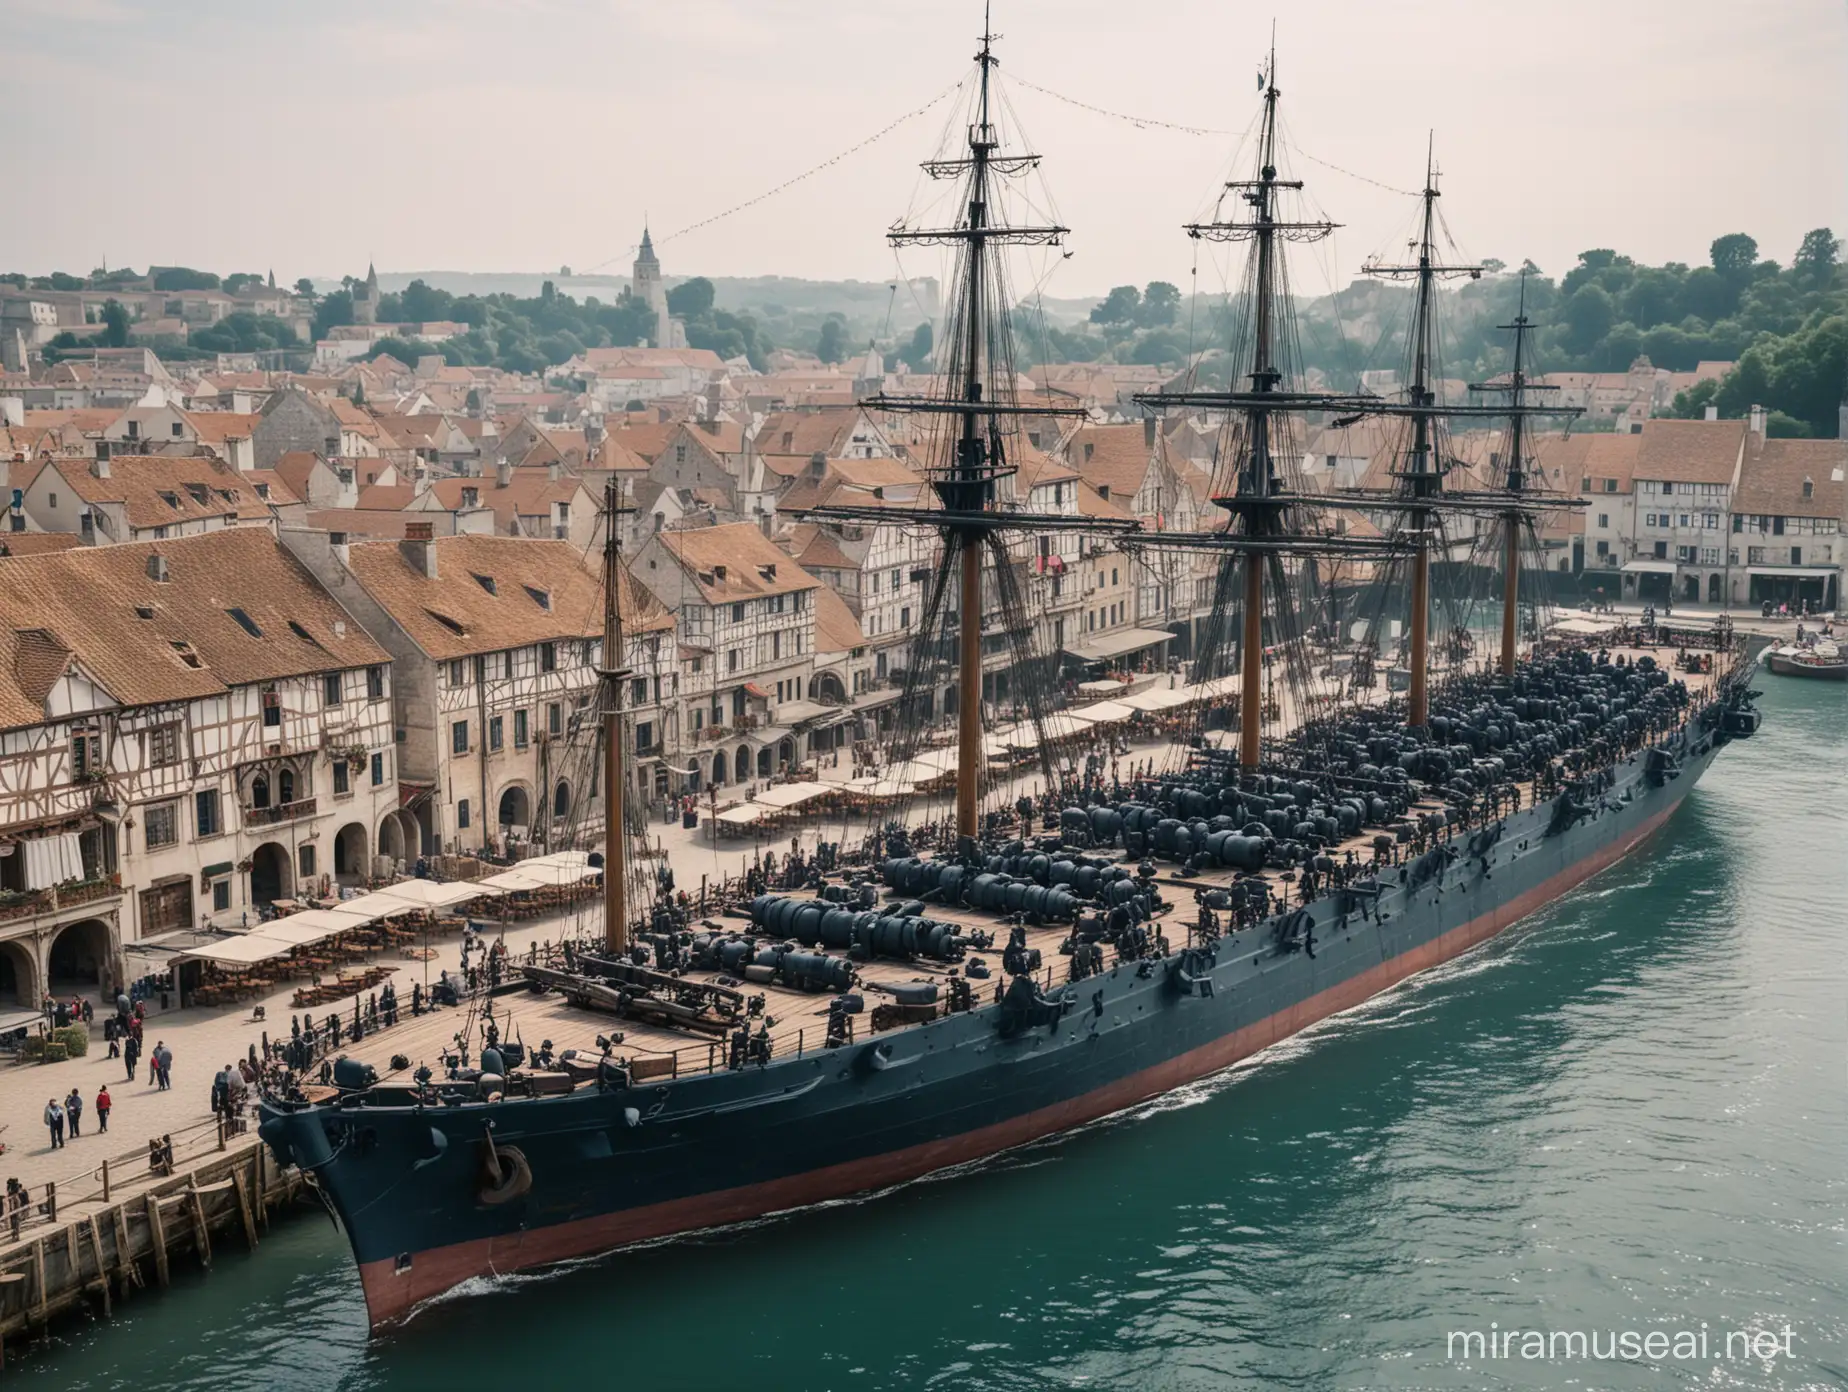 A large navy warship with many rows of cannons docked in a medieveal village. 